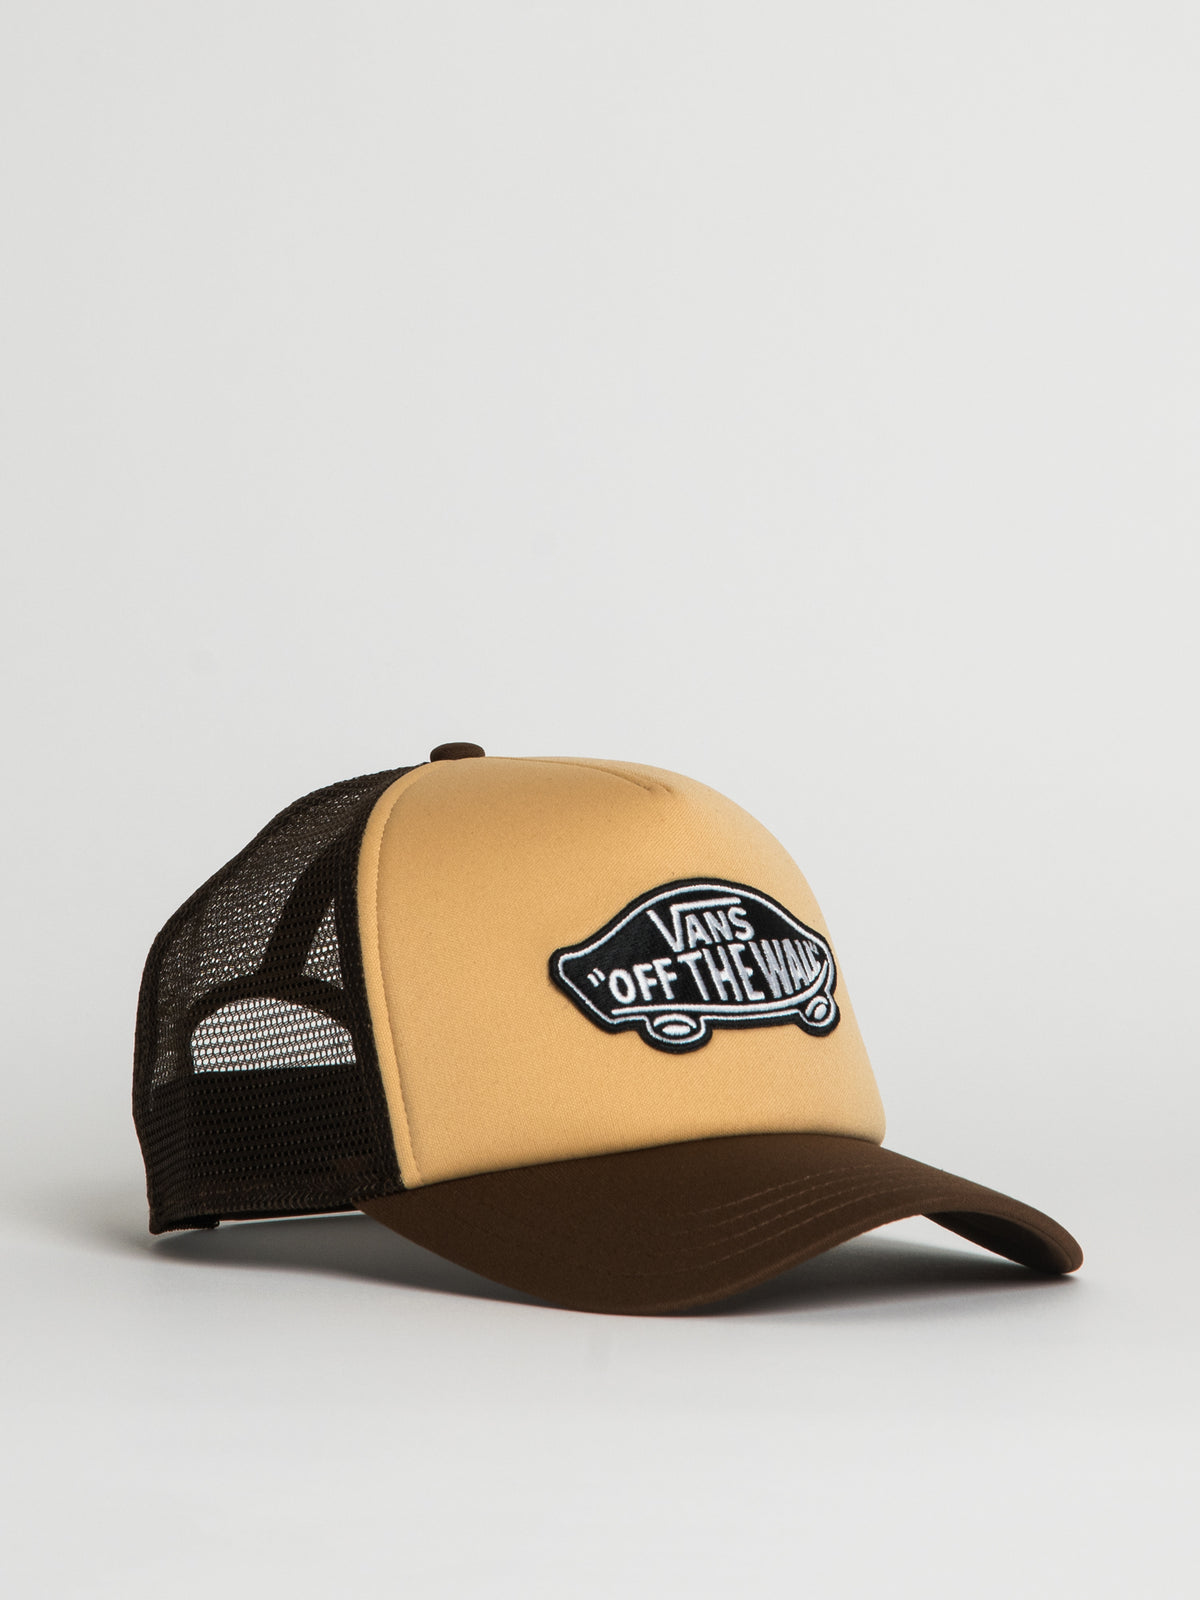 PATCH HAT CLASSIC Boathouse BILL Footwear Collective | TRUCKER CURVED VANS